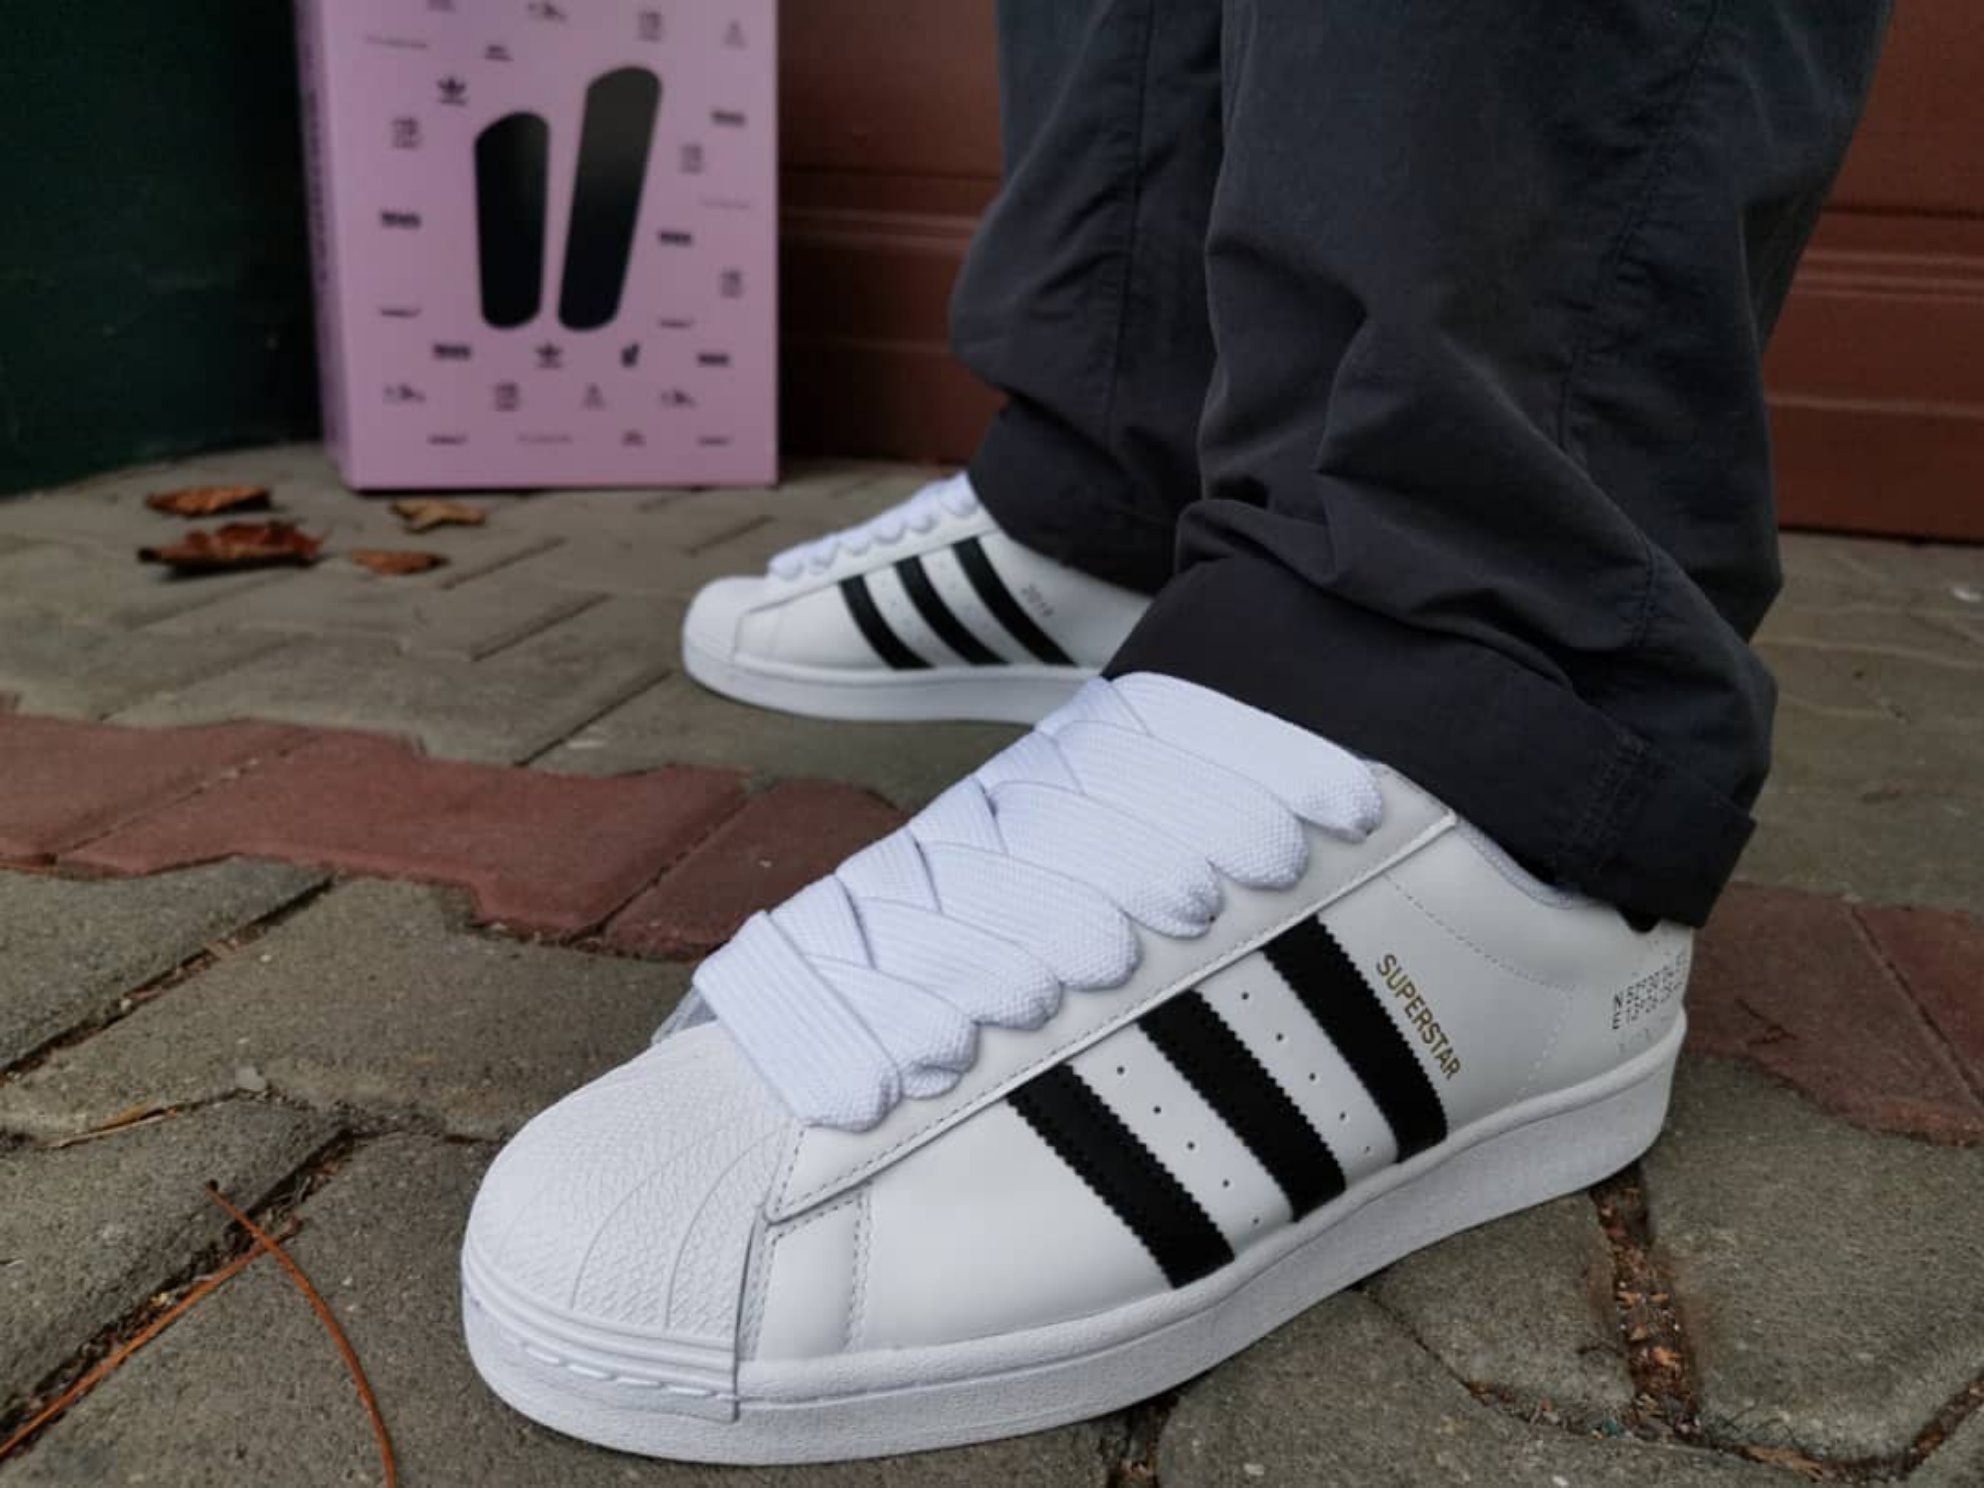 BBoy Laces on Twitter: "Reposting @supersk8: ... a family thing. 💜 * Thank you @overkillshop for the nice surprise. 🙏🏻 * Adidas Superstar sweet sixteen feat. xl fatlaces by @bboylaces * #